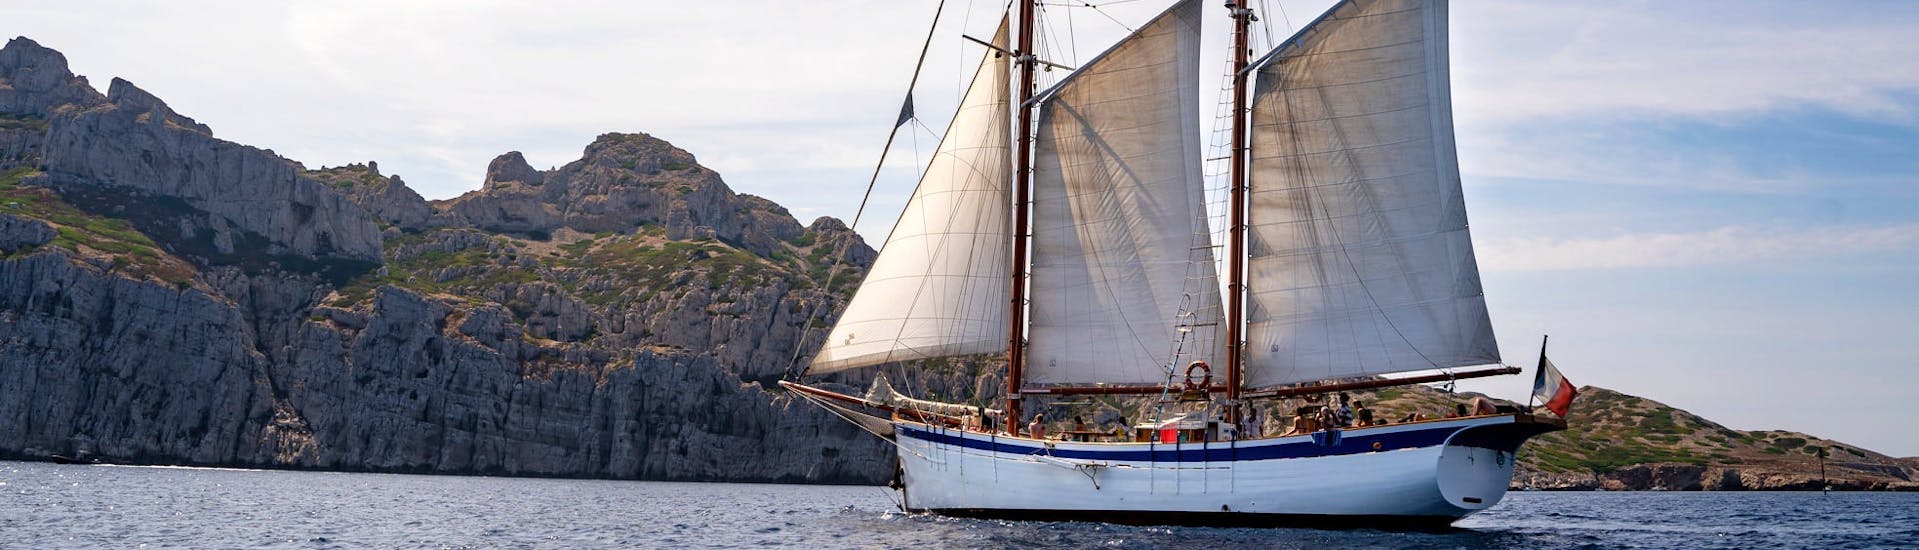 Our boat La Goélette Alliance captured during the Sailing Trip to the Calanques of Marseille with Snorkeling.